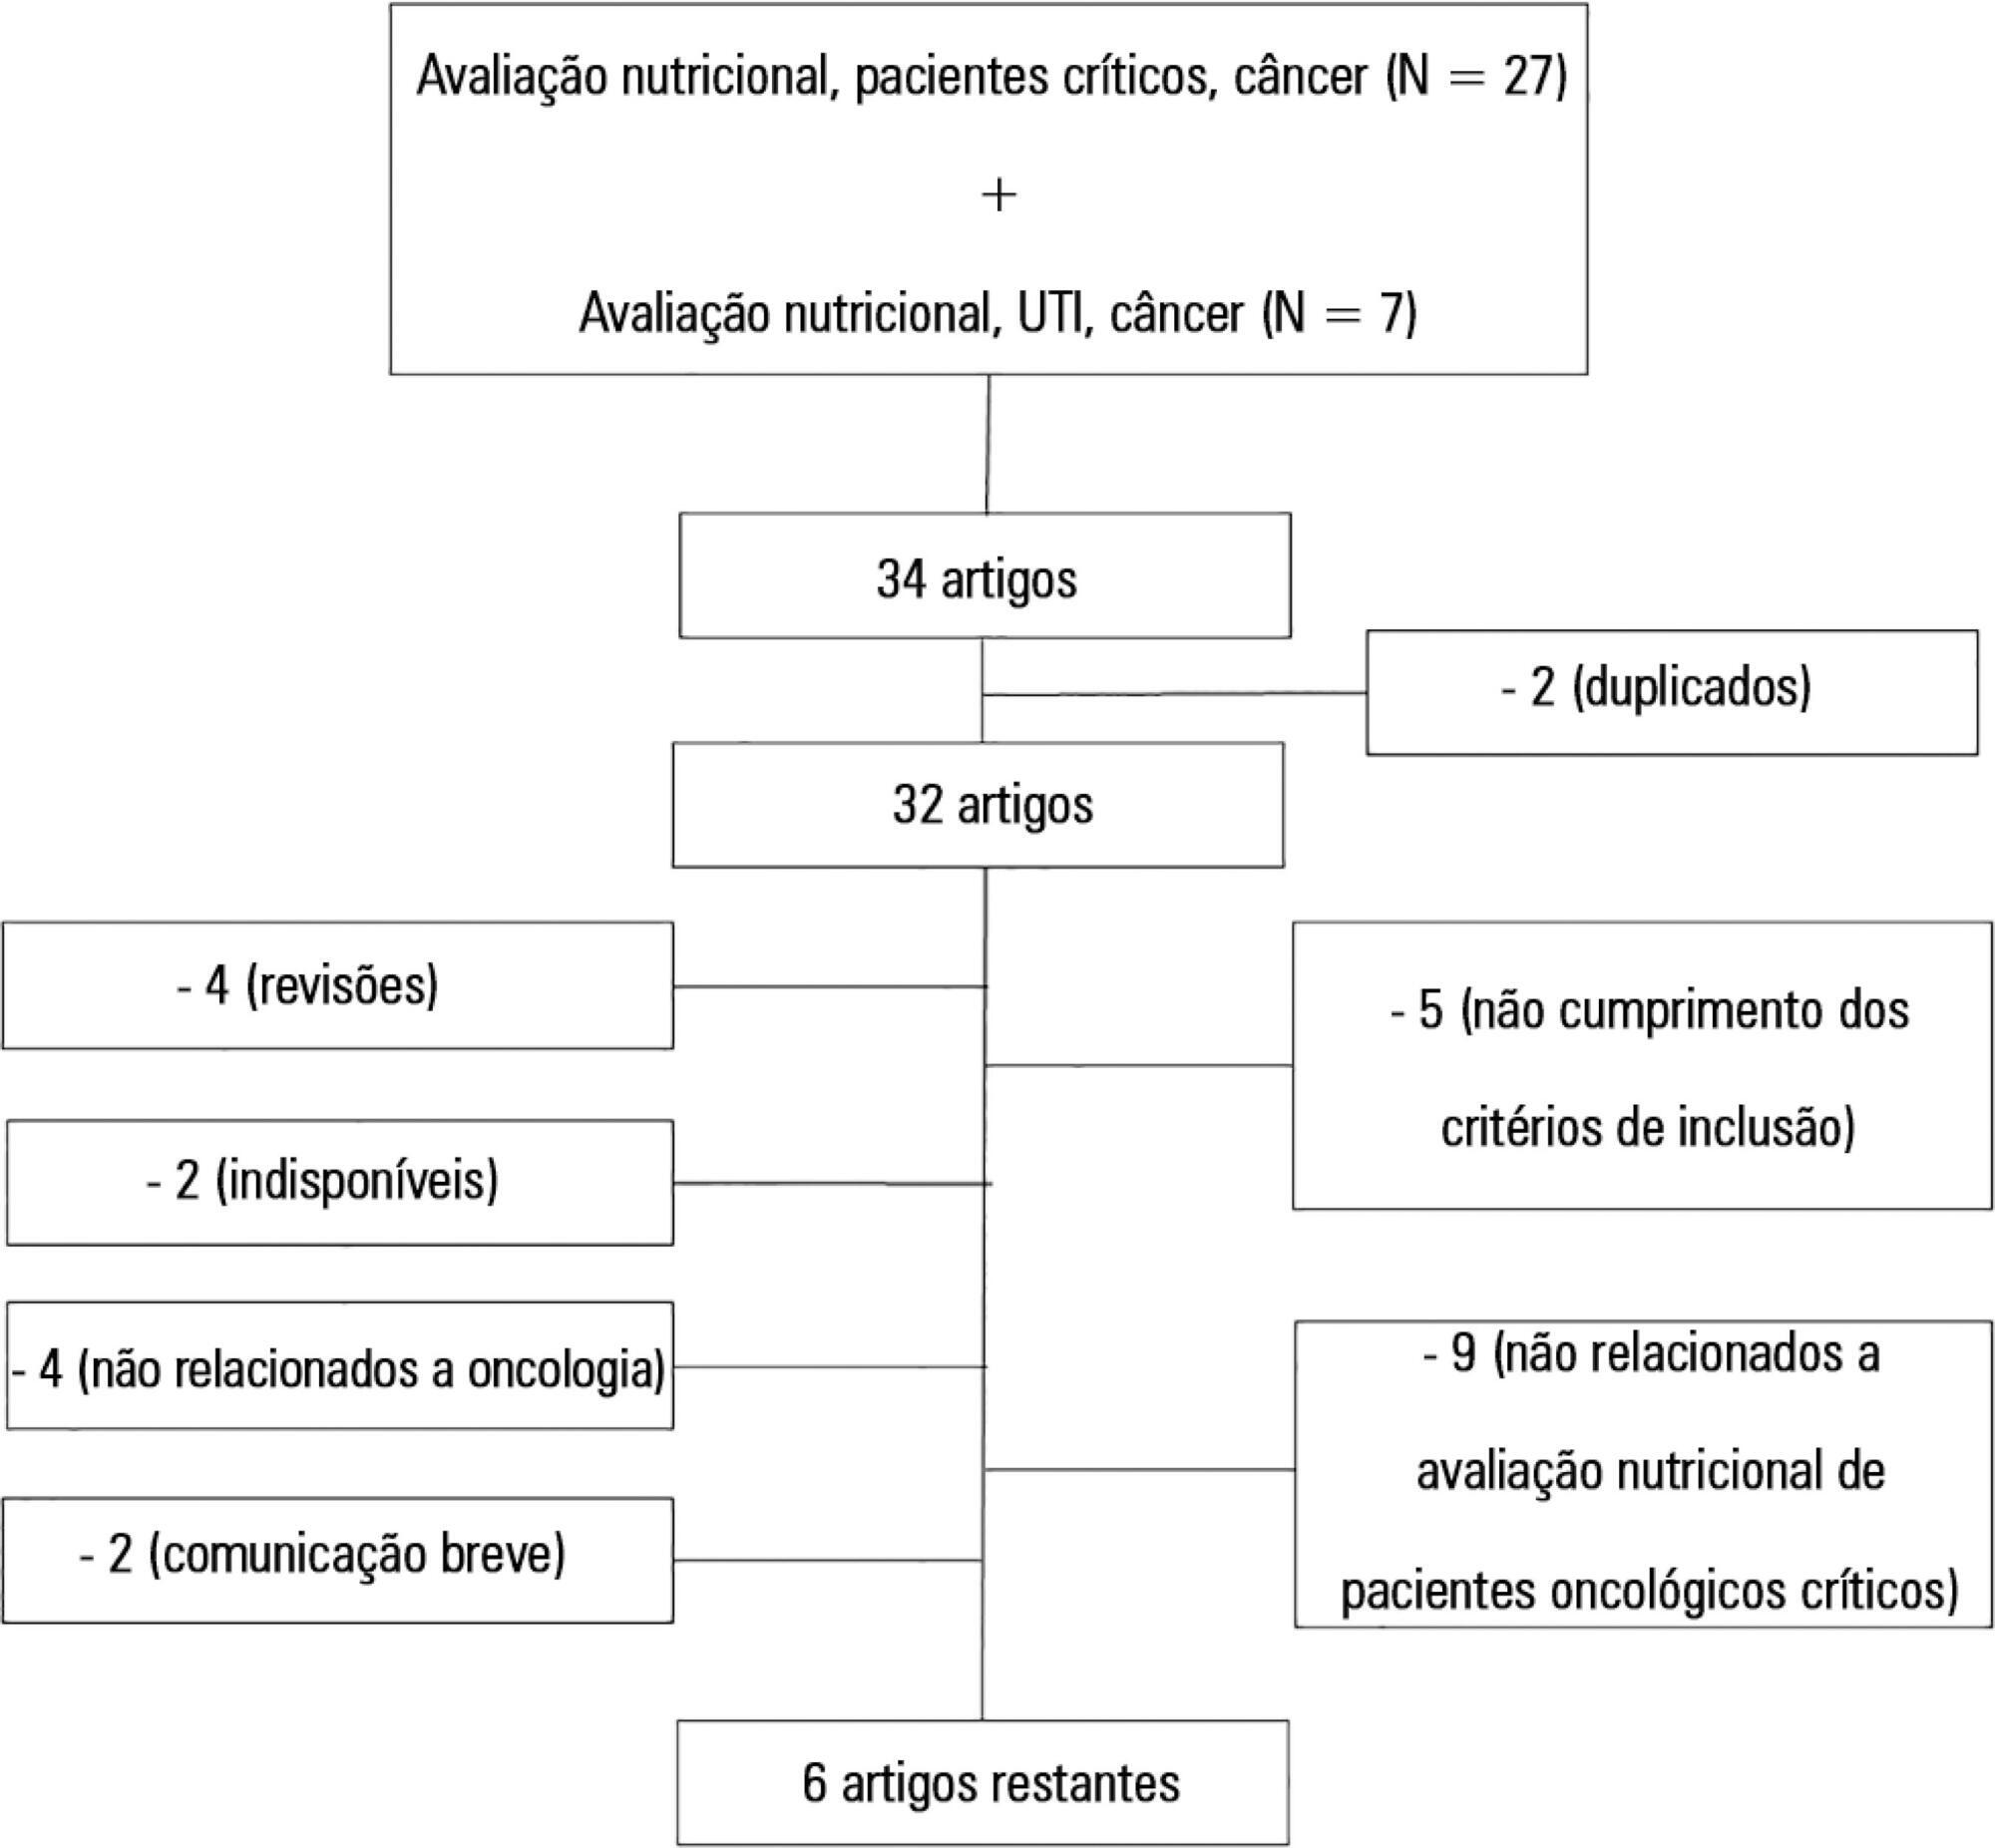 Nutritional risk assessment in critically ill cancer patients: systematic review